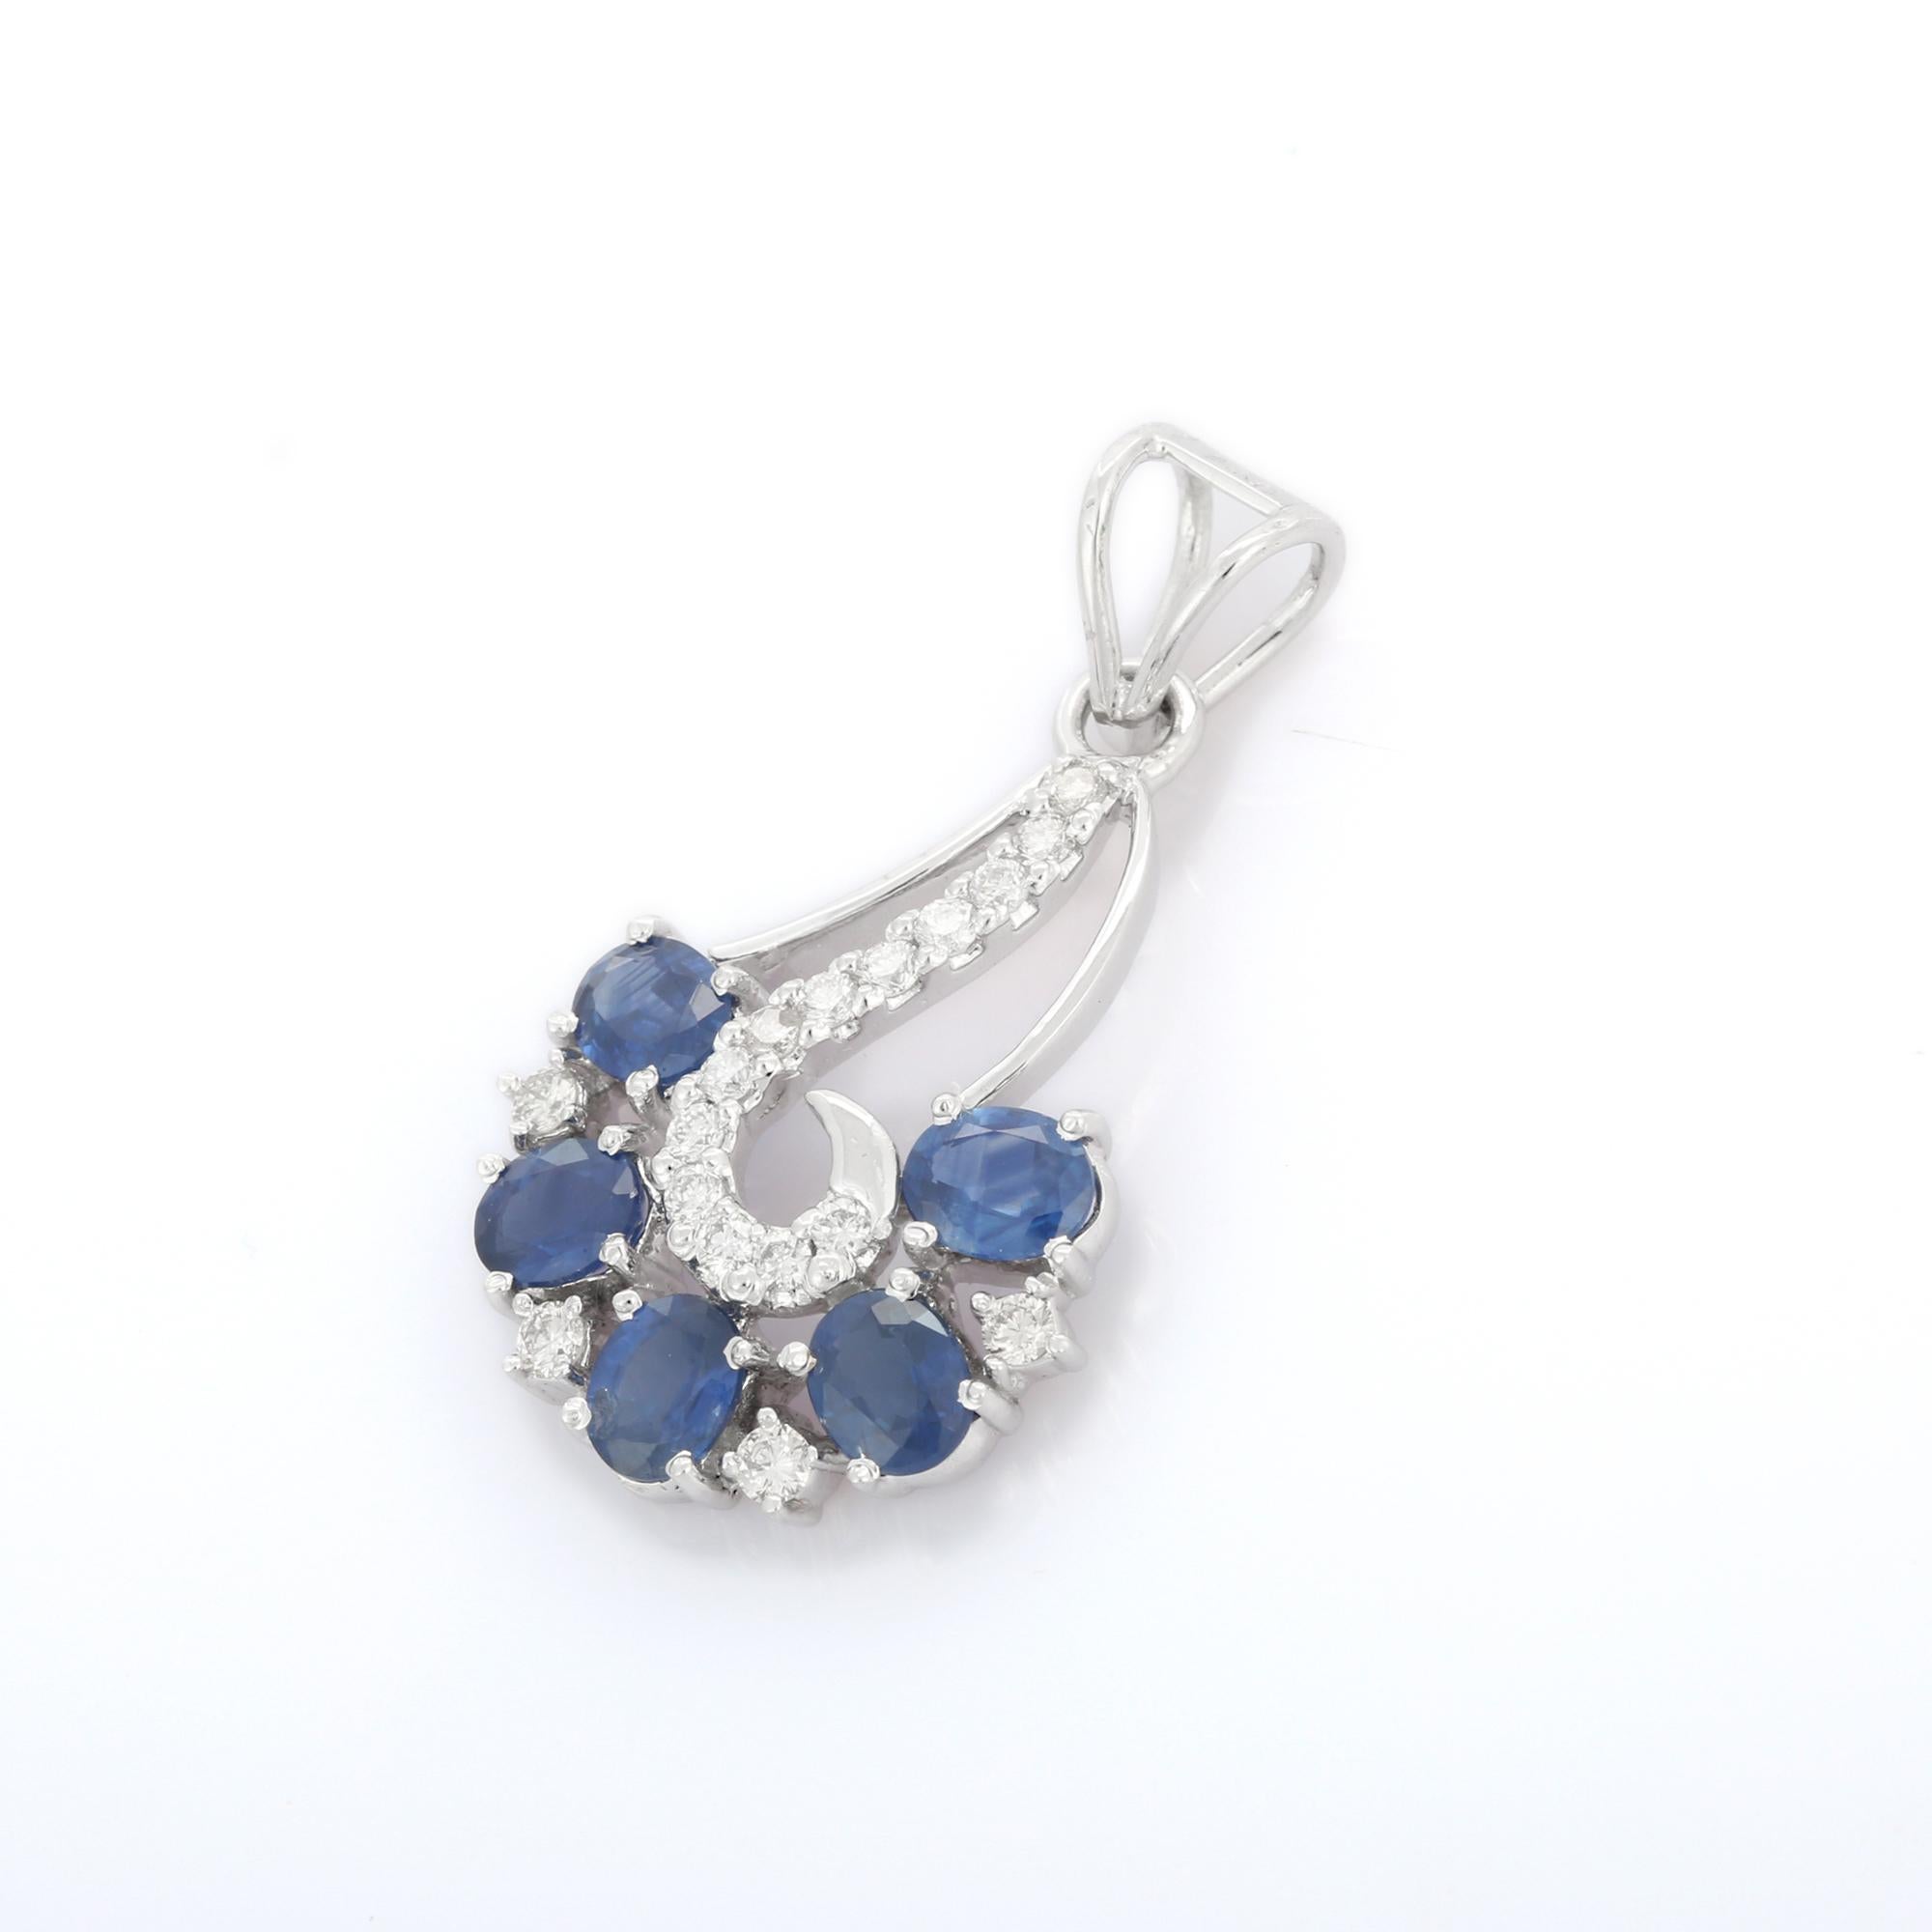 Art Nouveau 2.42 ct Blue Sapphire Diamond Pendant in 18K White Gold In New Condition For Sale In Houston, TX